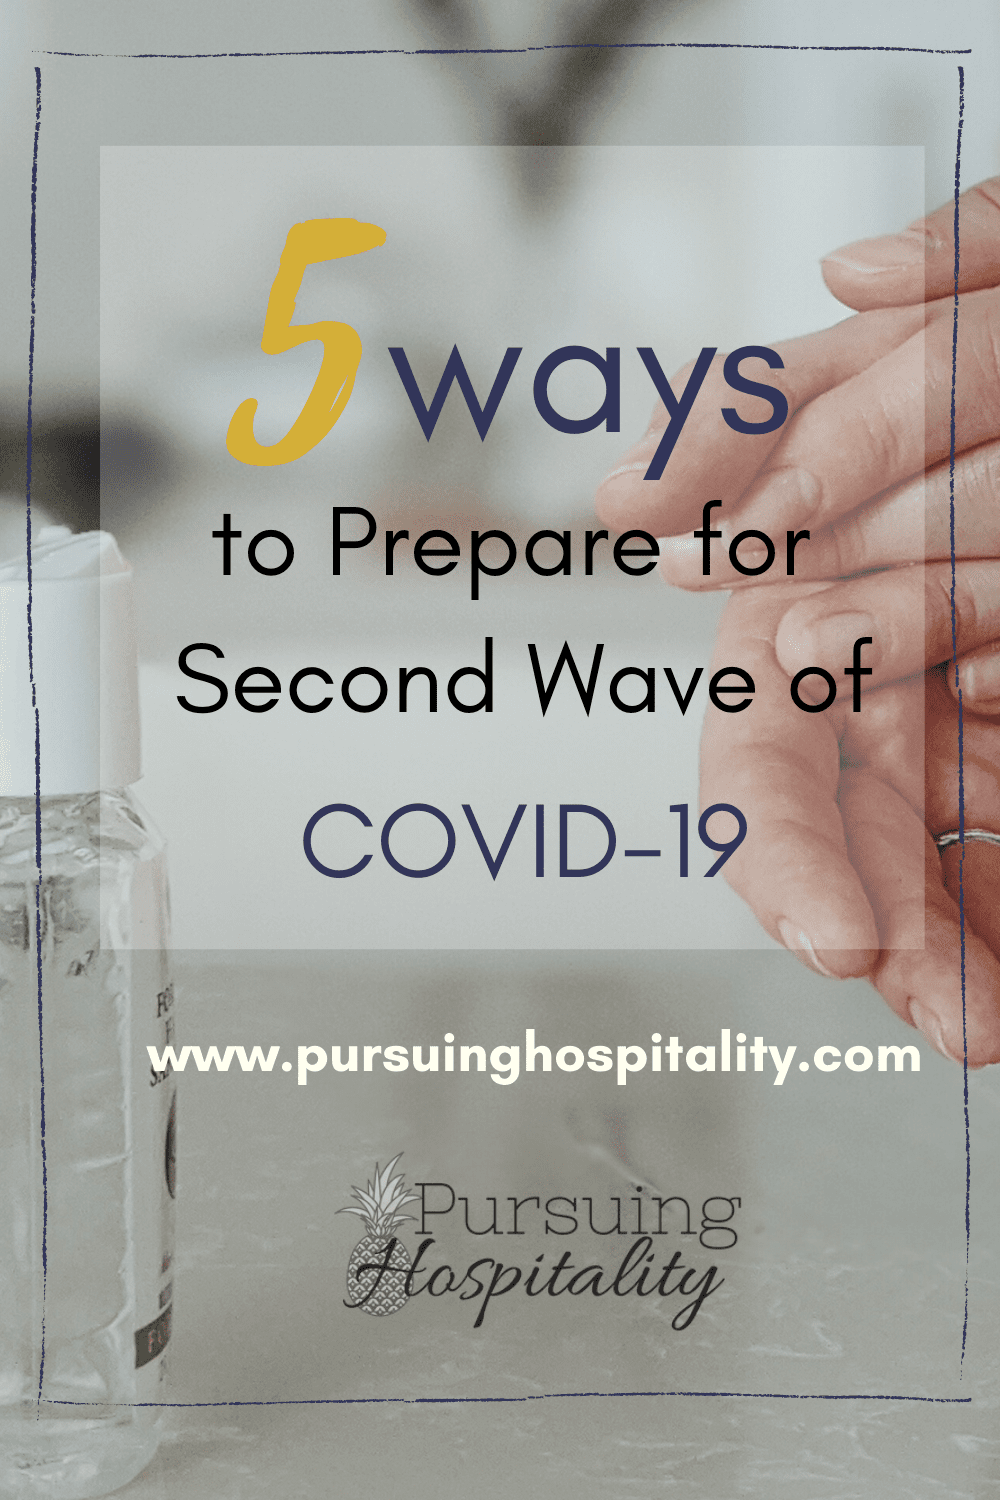 5 ways to prepare for Covid-19 second wave